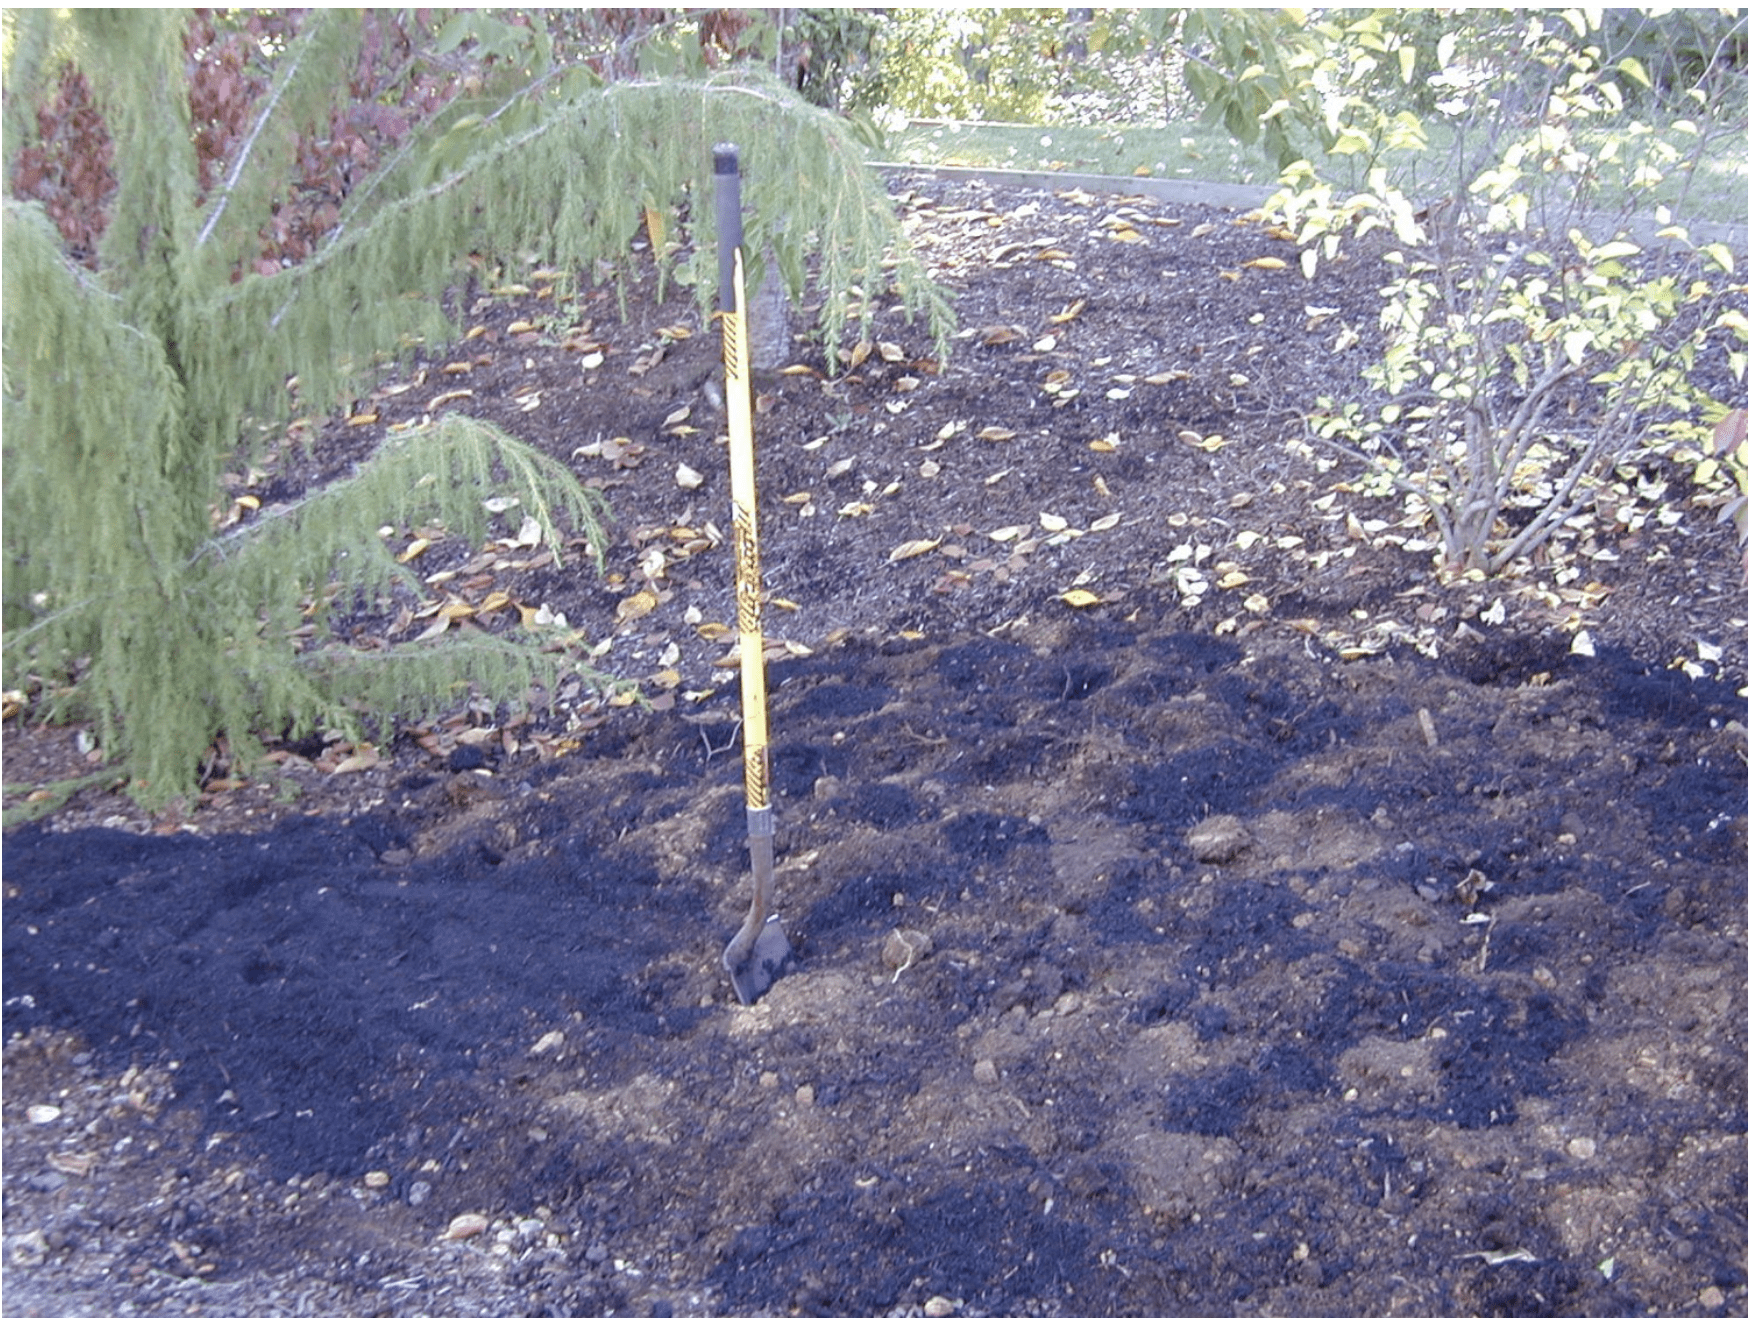 compost mixed into soil for a landscape bed